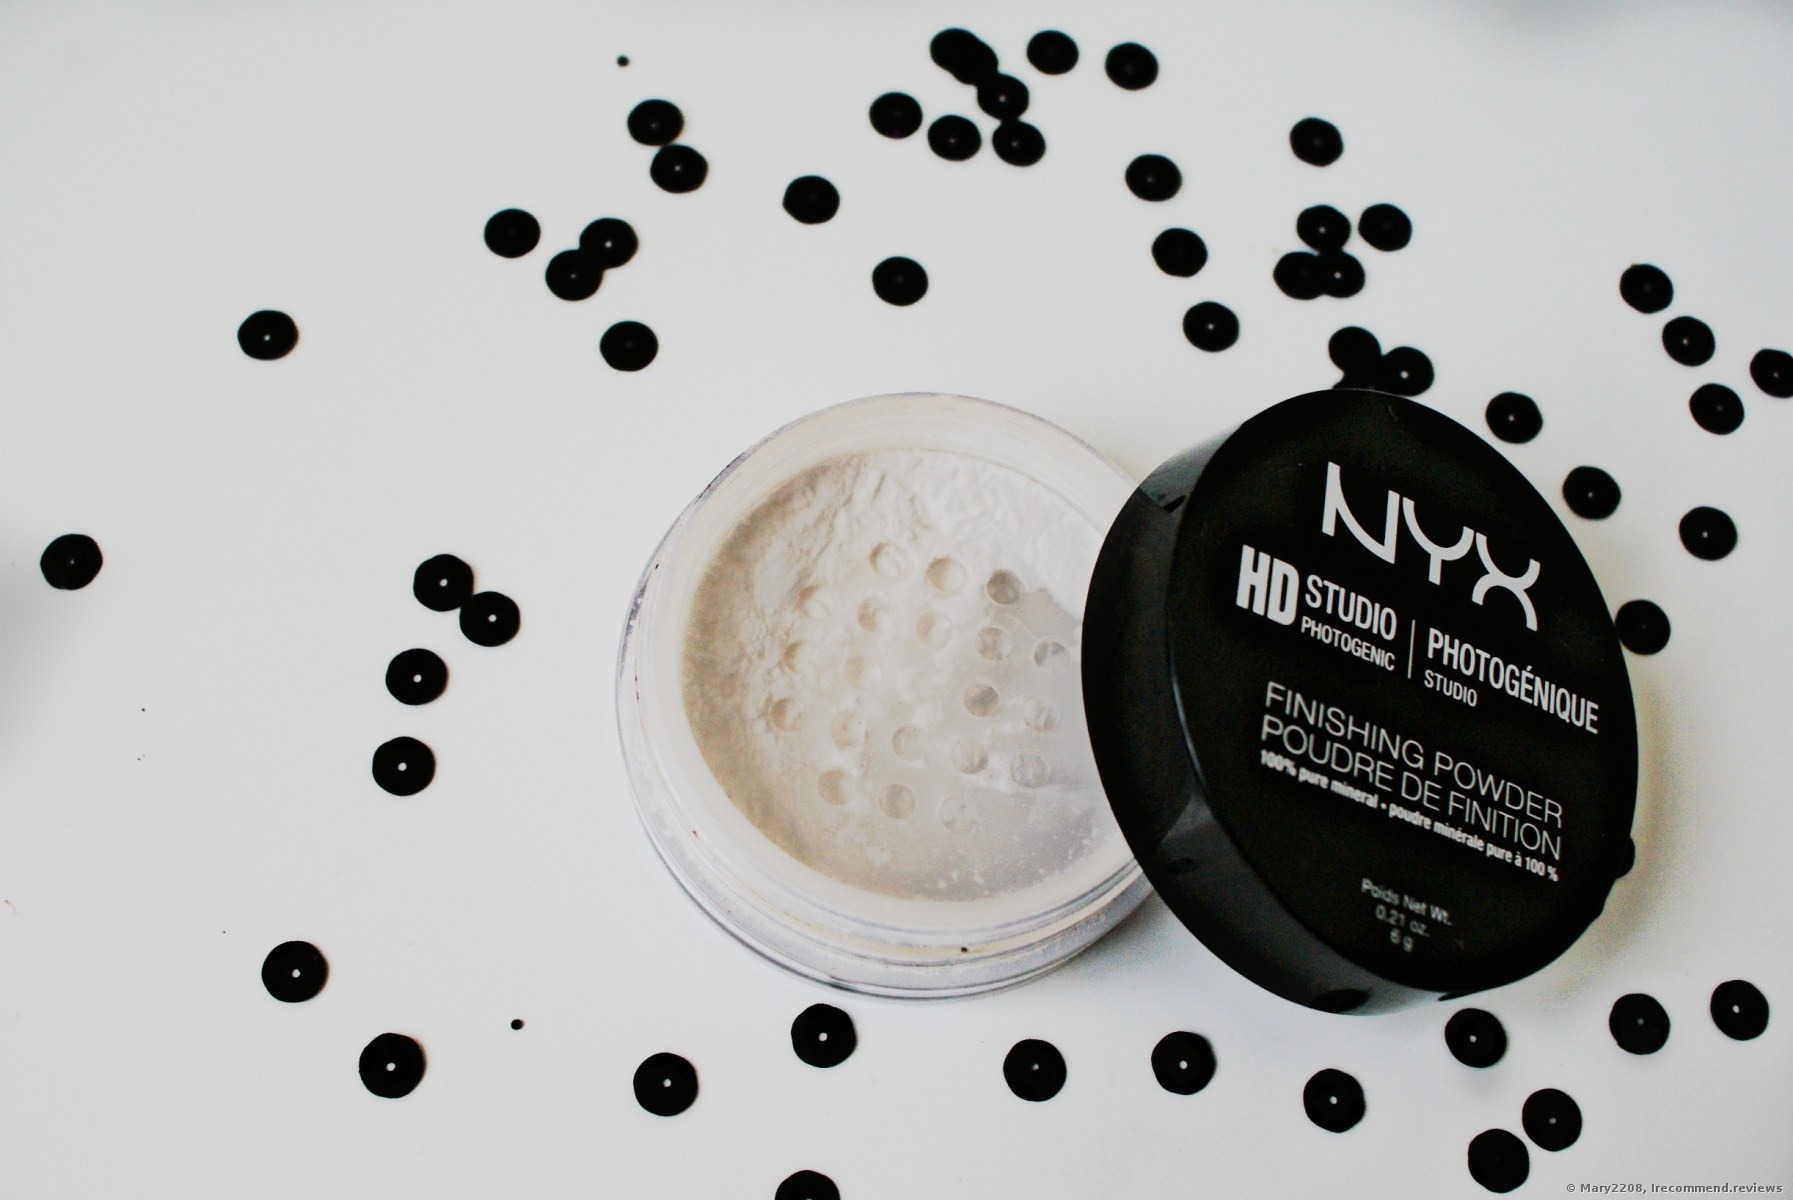 NYX HD STUDIO FINISHING POWDER - «The powder that is NOTICEABLE IN  PICTURES! Come on in and look at my white cheeks :) » | Consumer reviews